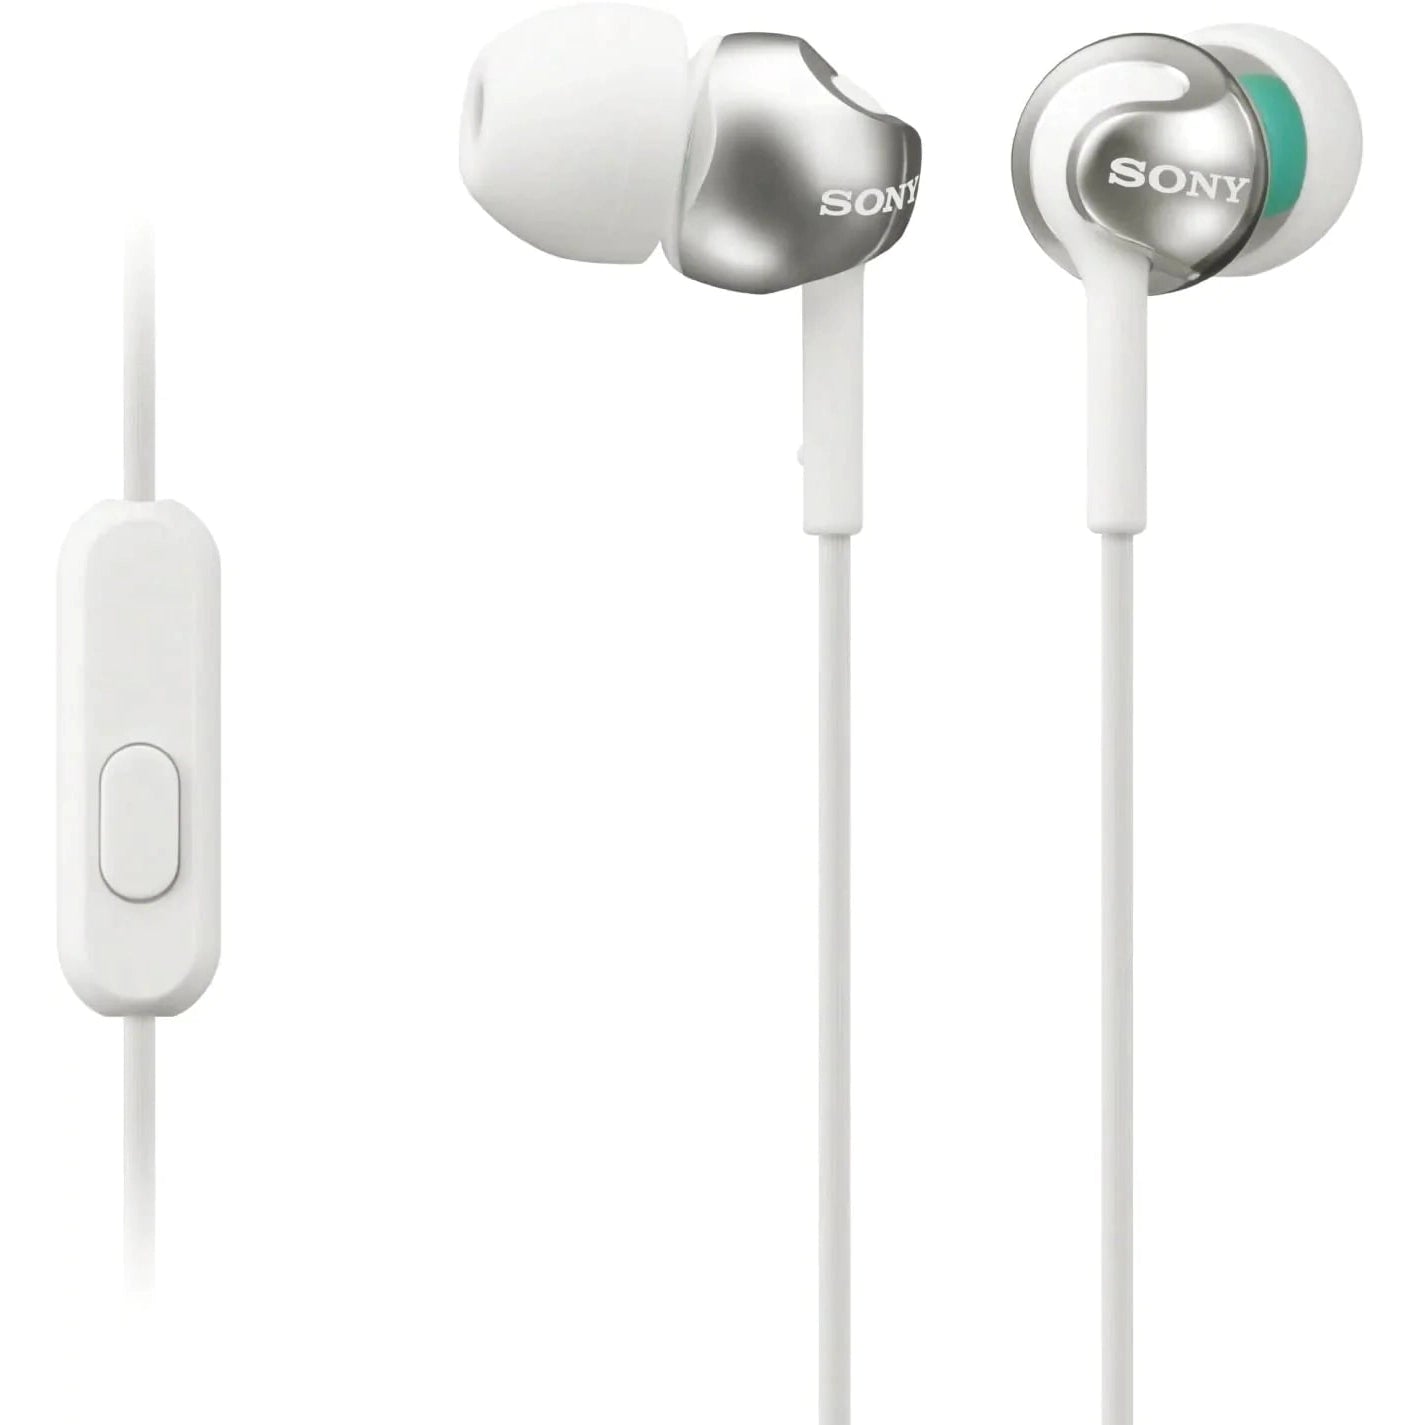 Sony MDR-EX110AP Deep Bass Earphones - White - Refurbished Excellent